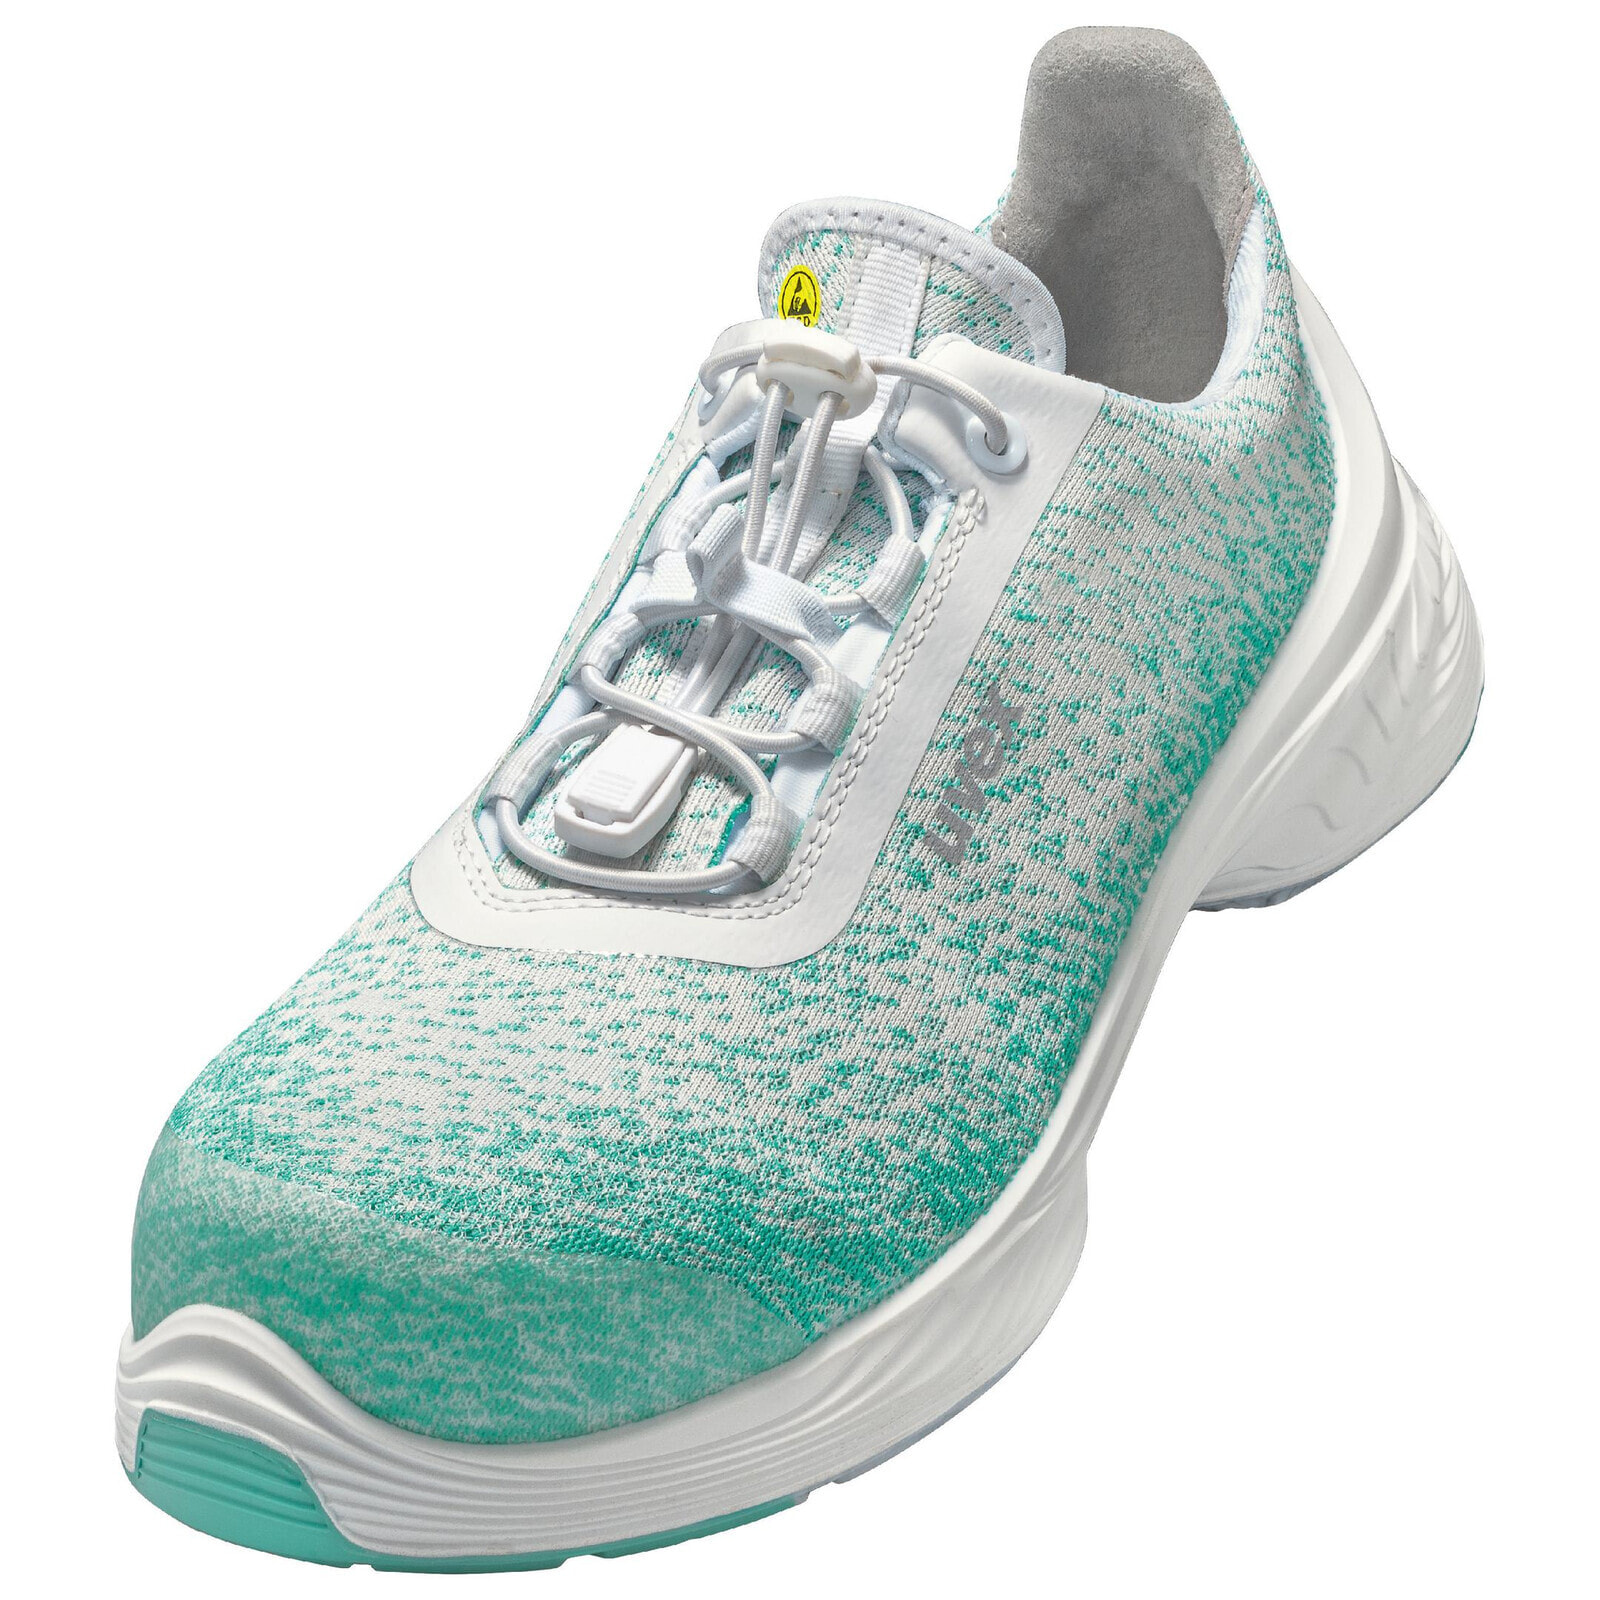 UVEX Arbeitsschutz 68232 - Unisex - Adult - Safety shoes - White - Green - P - S1 - ESD - SRC - Speed laces